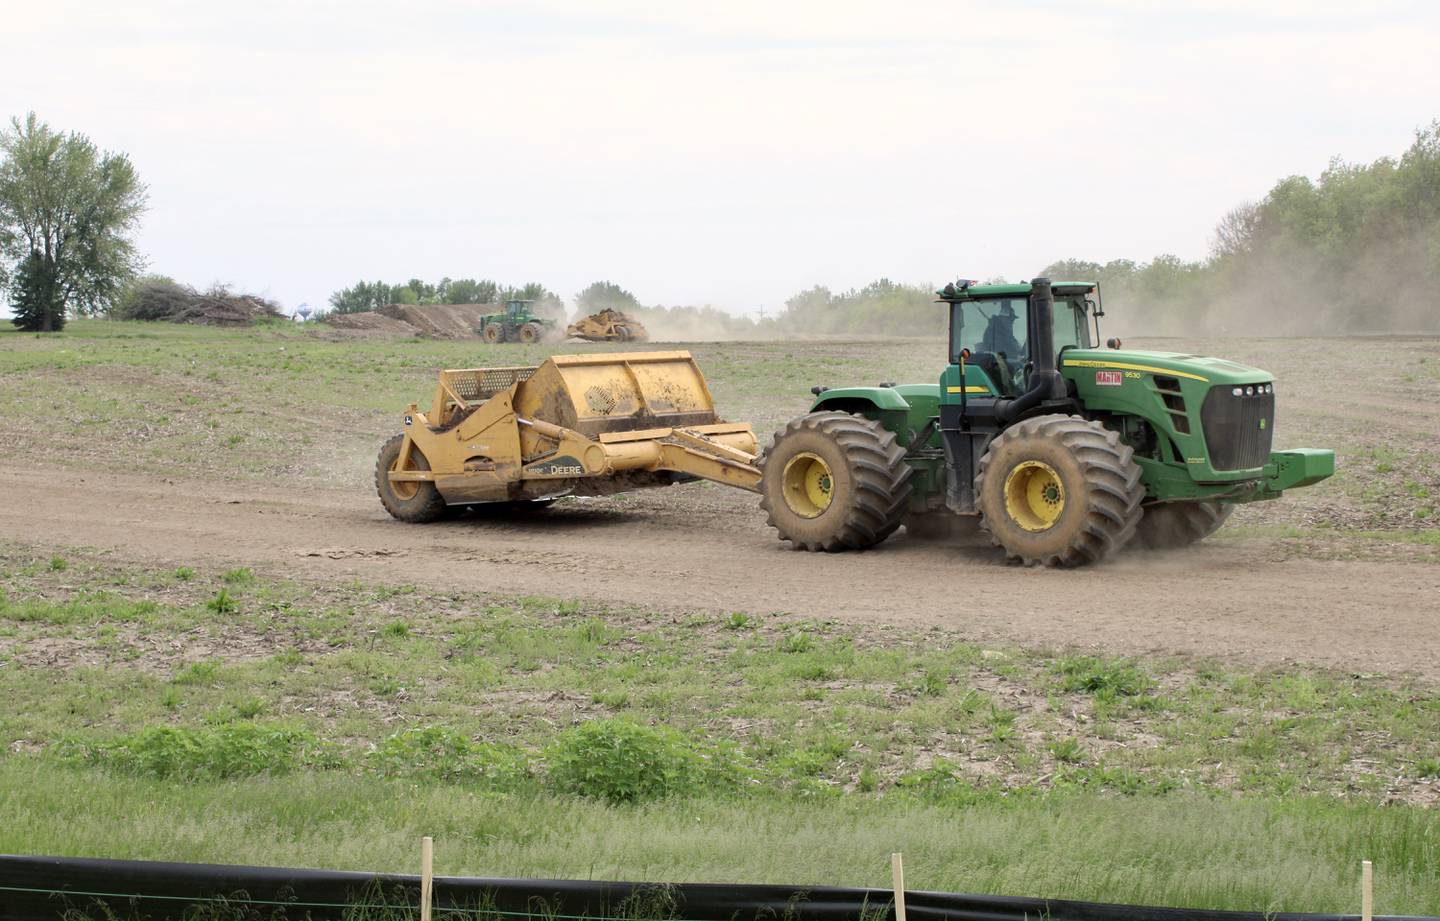 A tractor pulls a grade-leveling scraper over a section of the Dixon Gateway Project property near Illinois Route 26 and Keul Road on Tuesday. A groundbreaking for the project was April 28. The Gateway Project will bring a new hotel, gas station, restaurants and shops on 27 acres.